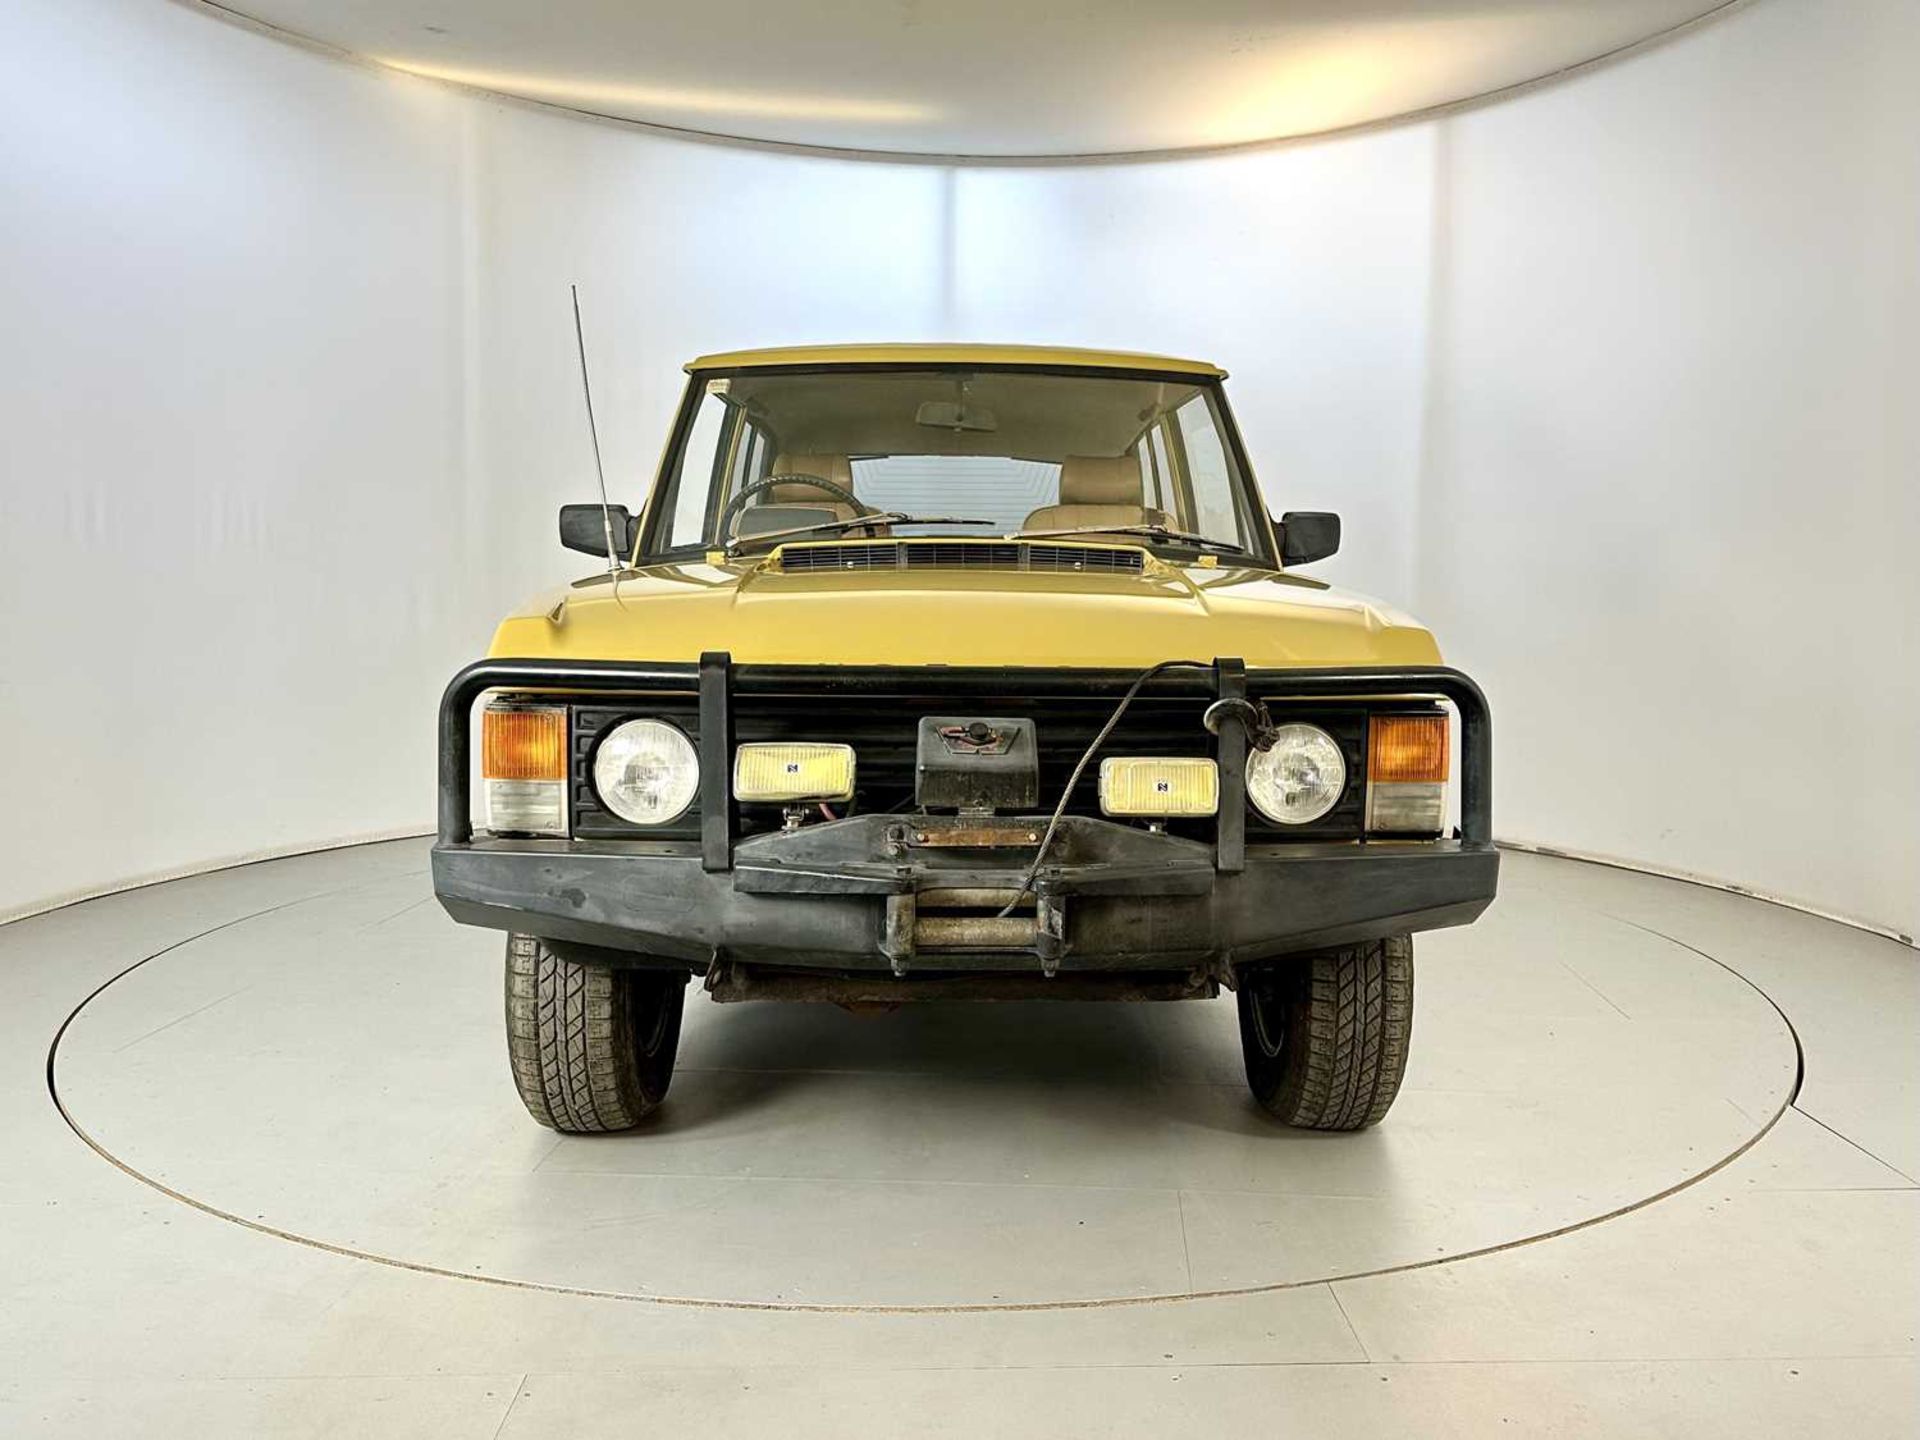 1974 Land Rover Range Rover Showing 26,000 miles from new - Image 2 of 29